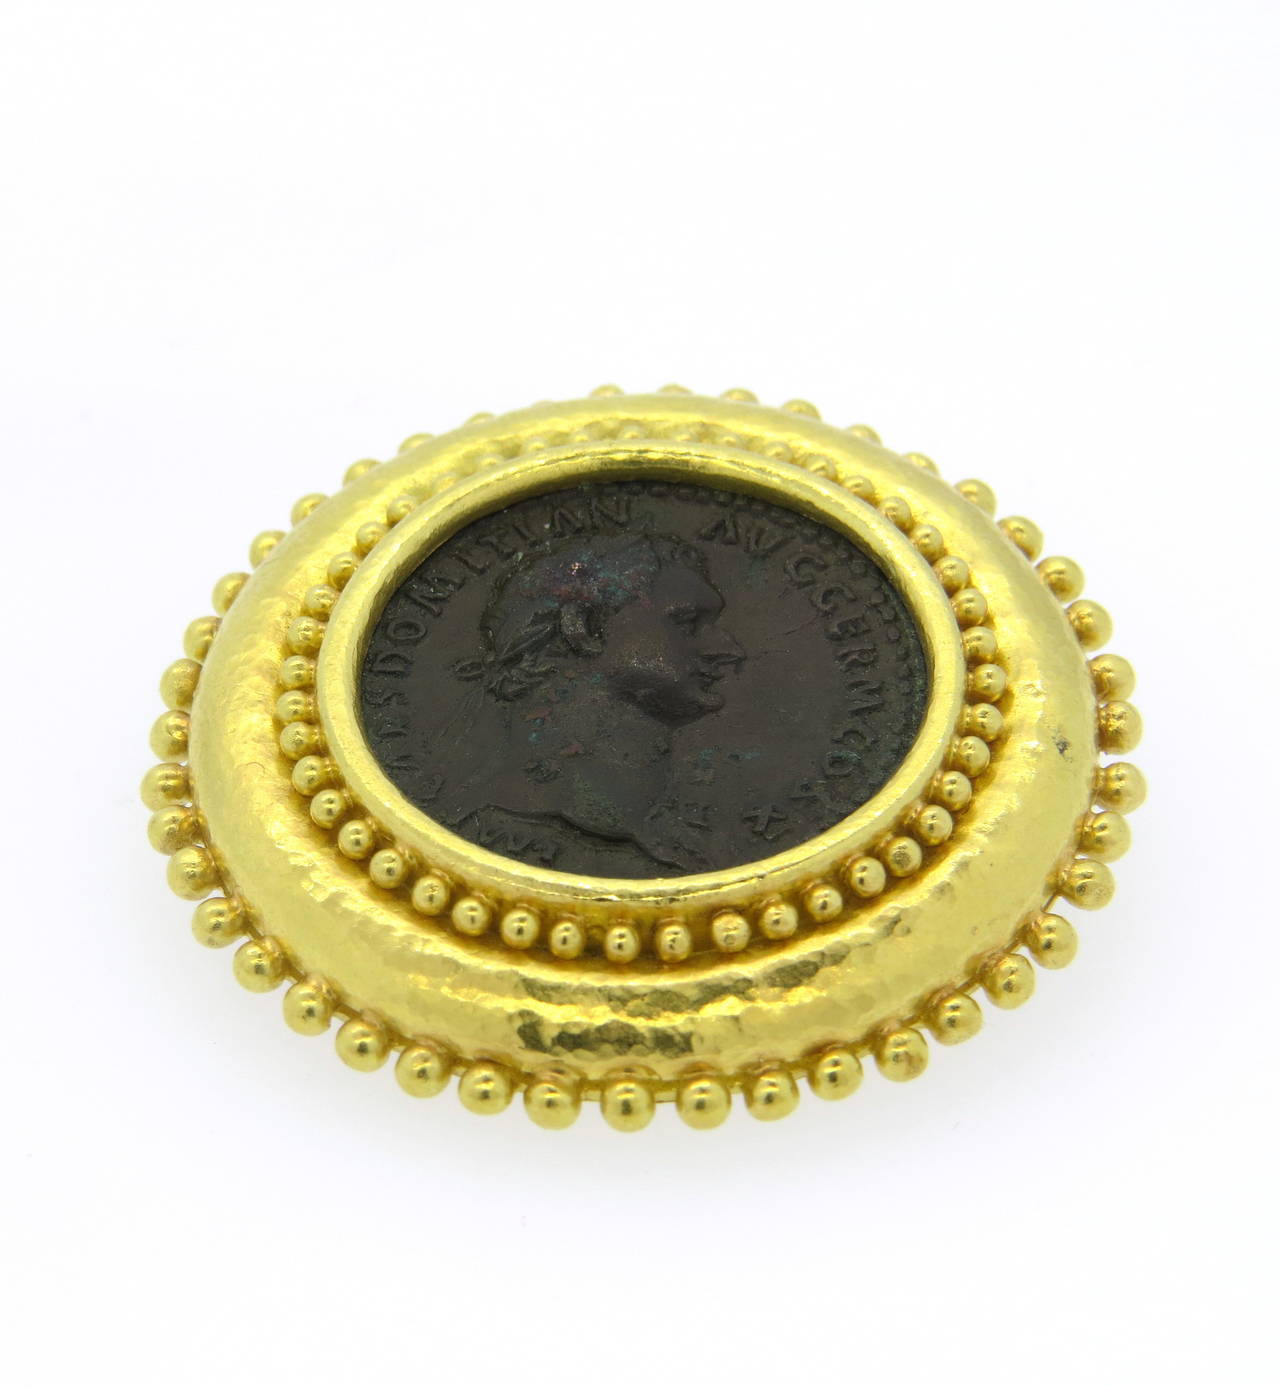 An 18k yellow gold brooch set with an ancient coin.  Crafted by Elizabeth Locke, the brooch measures 46mm in diameter and weighs 37.1 grams.